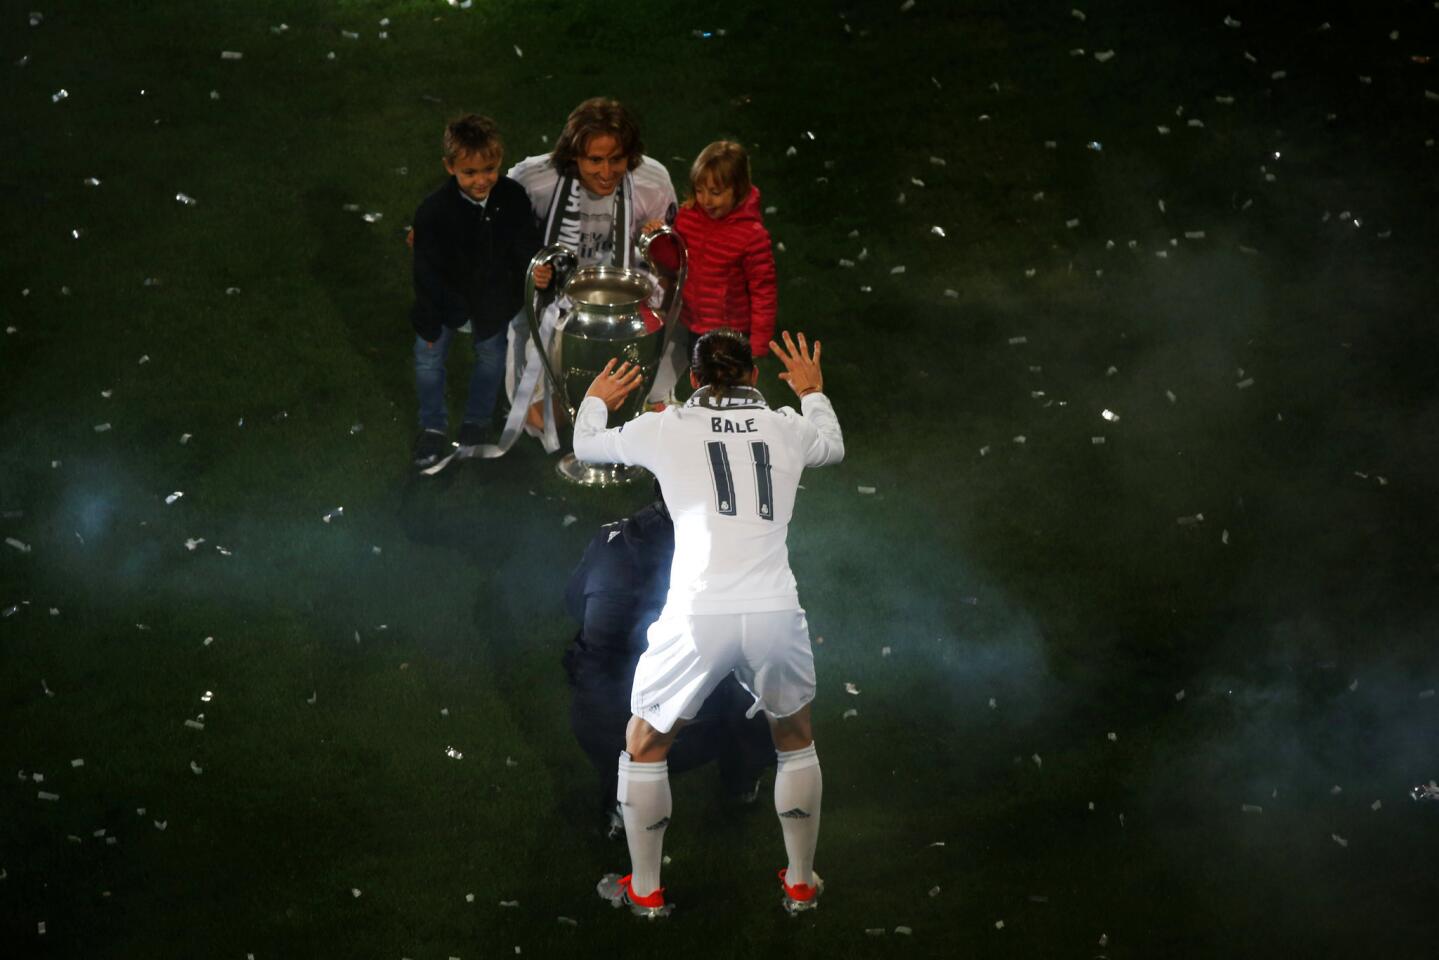 Soccer Football - Atletico Madrid v Real Madrid - UEFA Champions League Final - Santiago Bernabeu Stadium, Madrid, Spain - 29/5/16 Real Madrid's Gareth Bale reacts as teammate Luka Modric poses with his children with the Champions League trophy during a victory ceremony. REUTERS/Susana Vera ** Usable by SD ONLY **